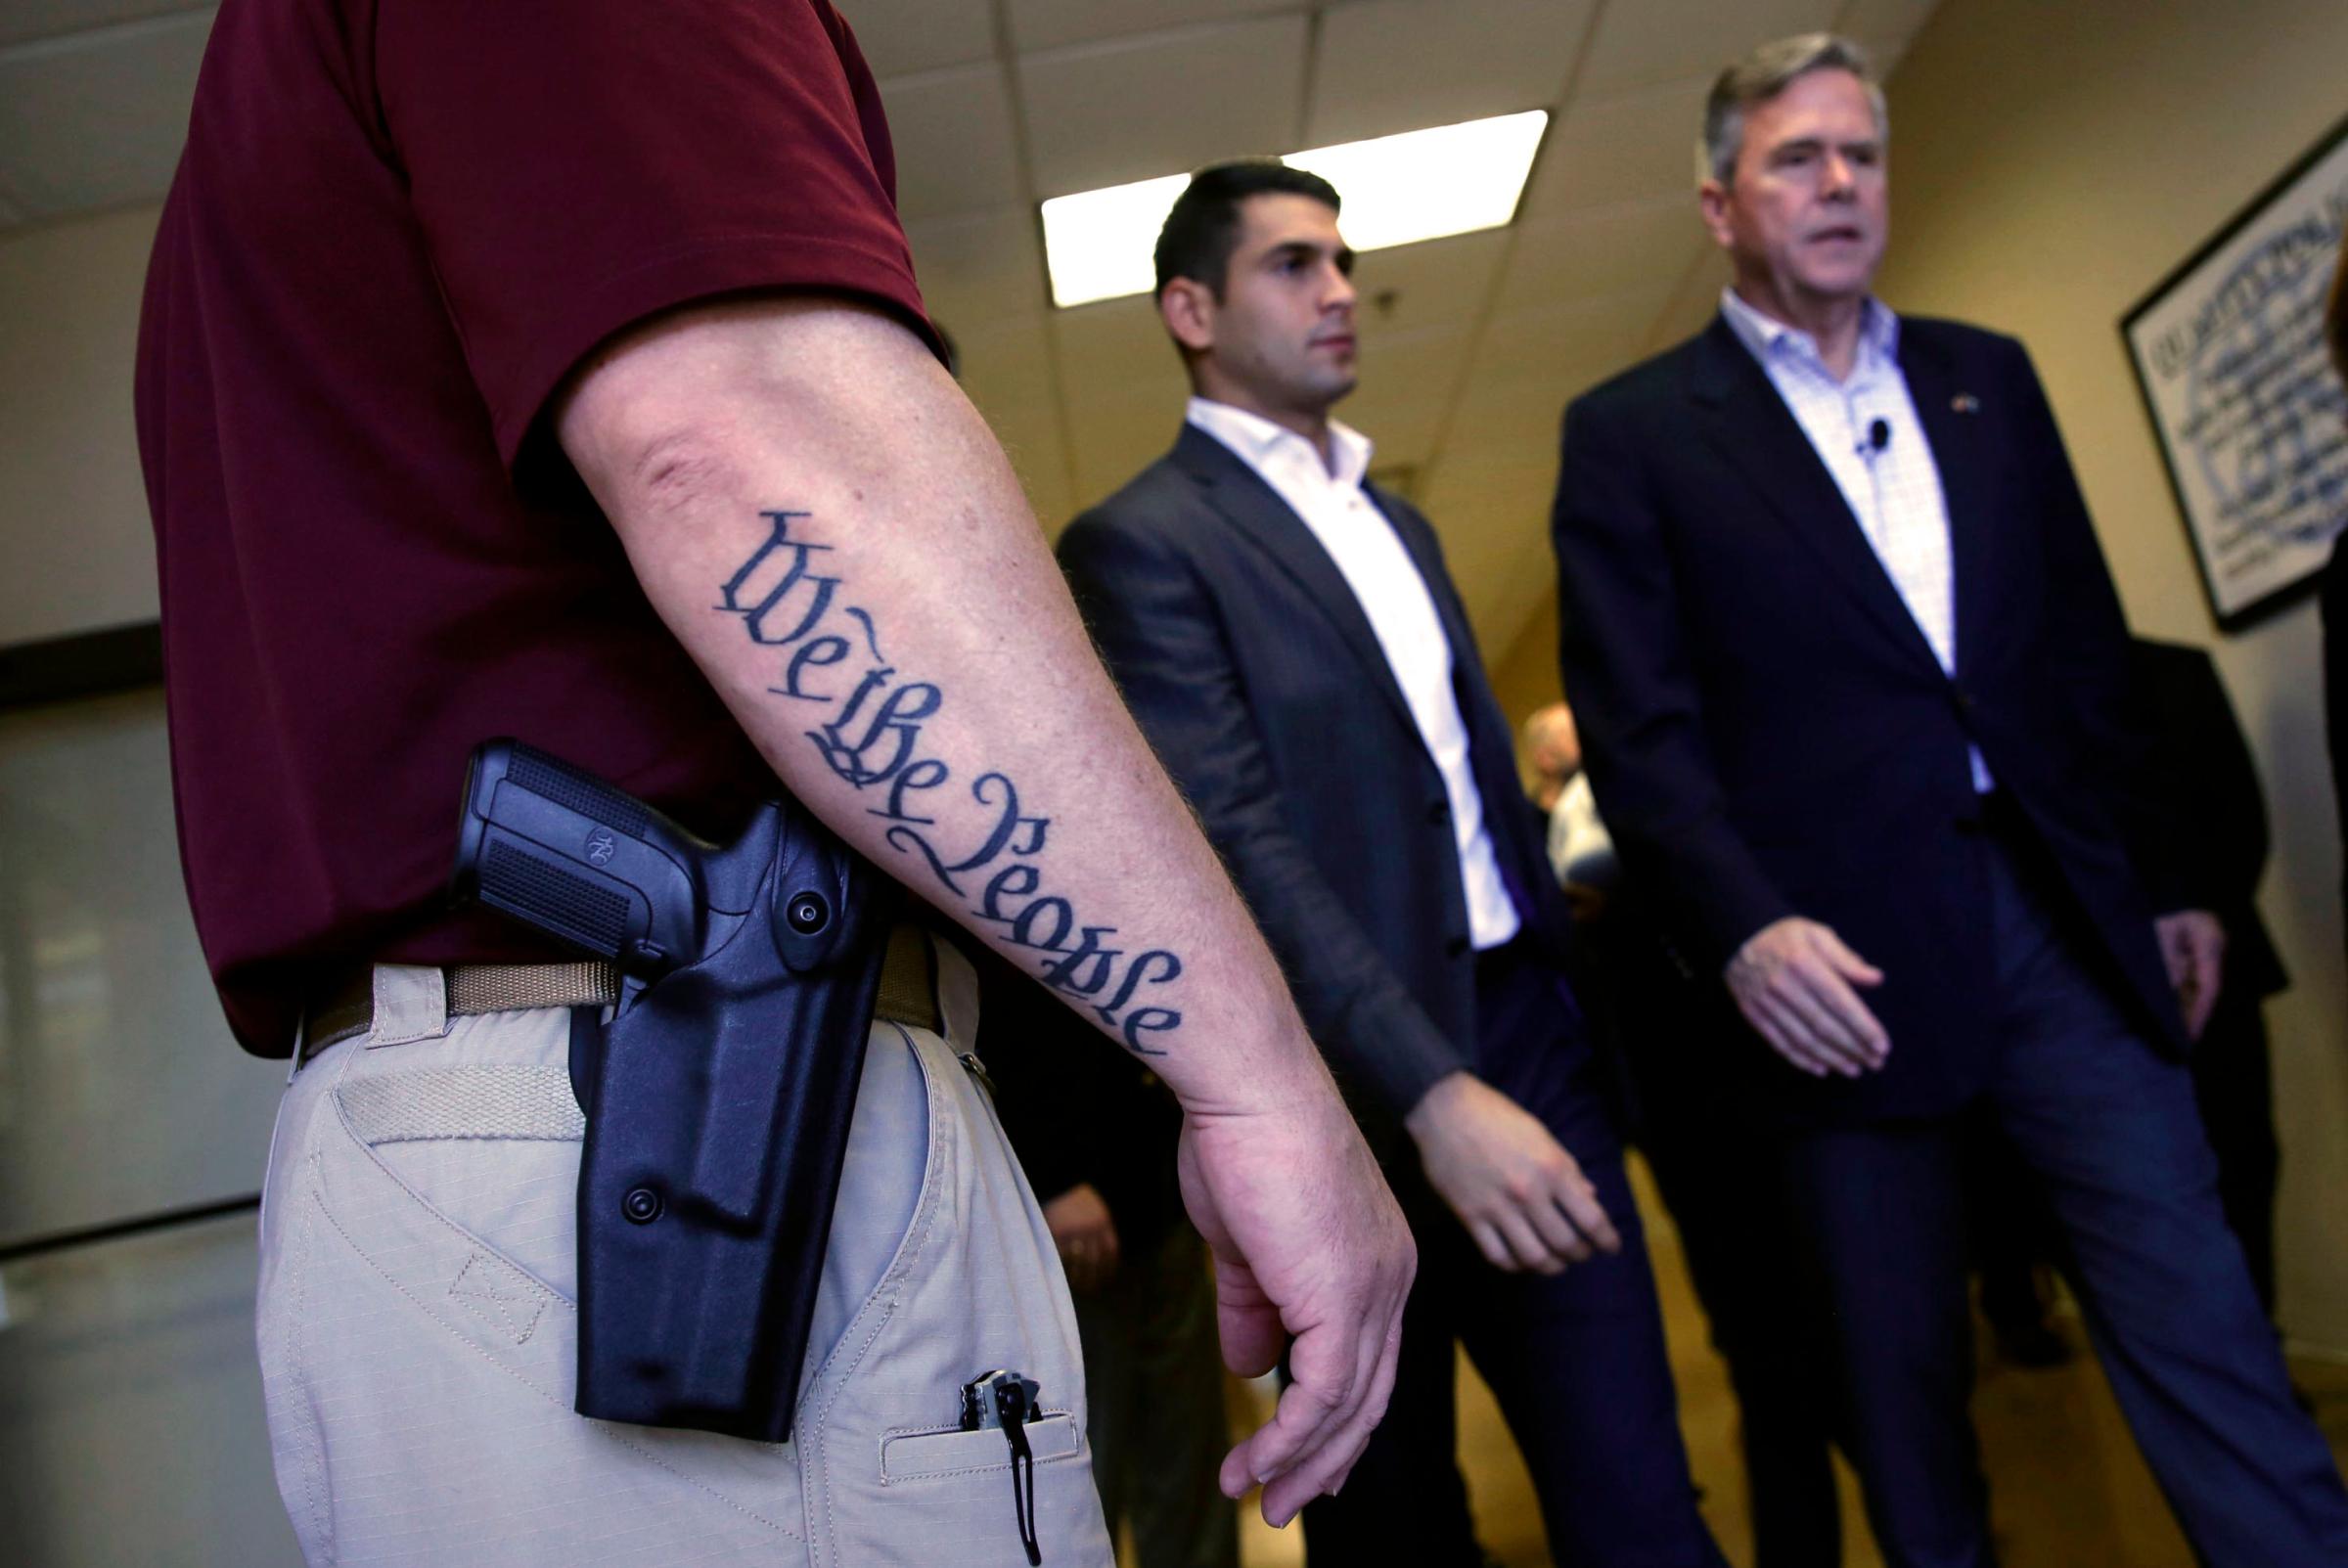 Republican presidential candidate Jeb Bush walks past a security guard after a town hall meeting with employees at FN America gun manufacturers in Columbia, S.C. on Feb. 16, 2016.